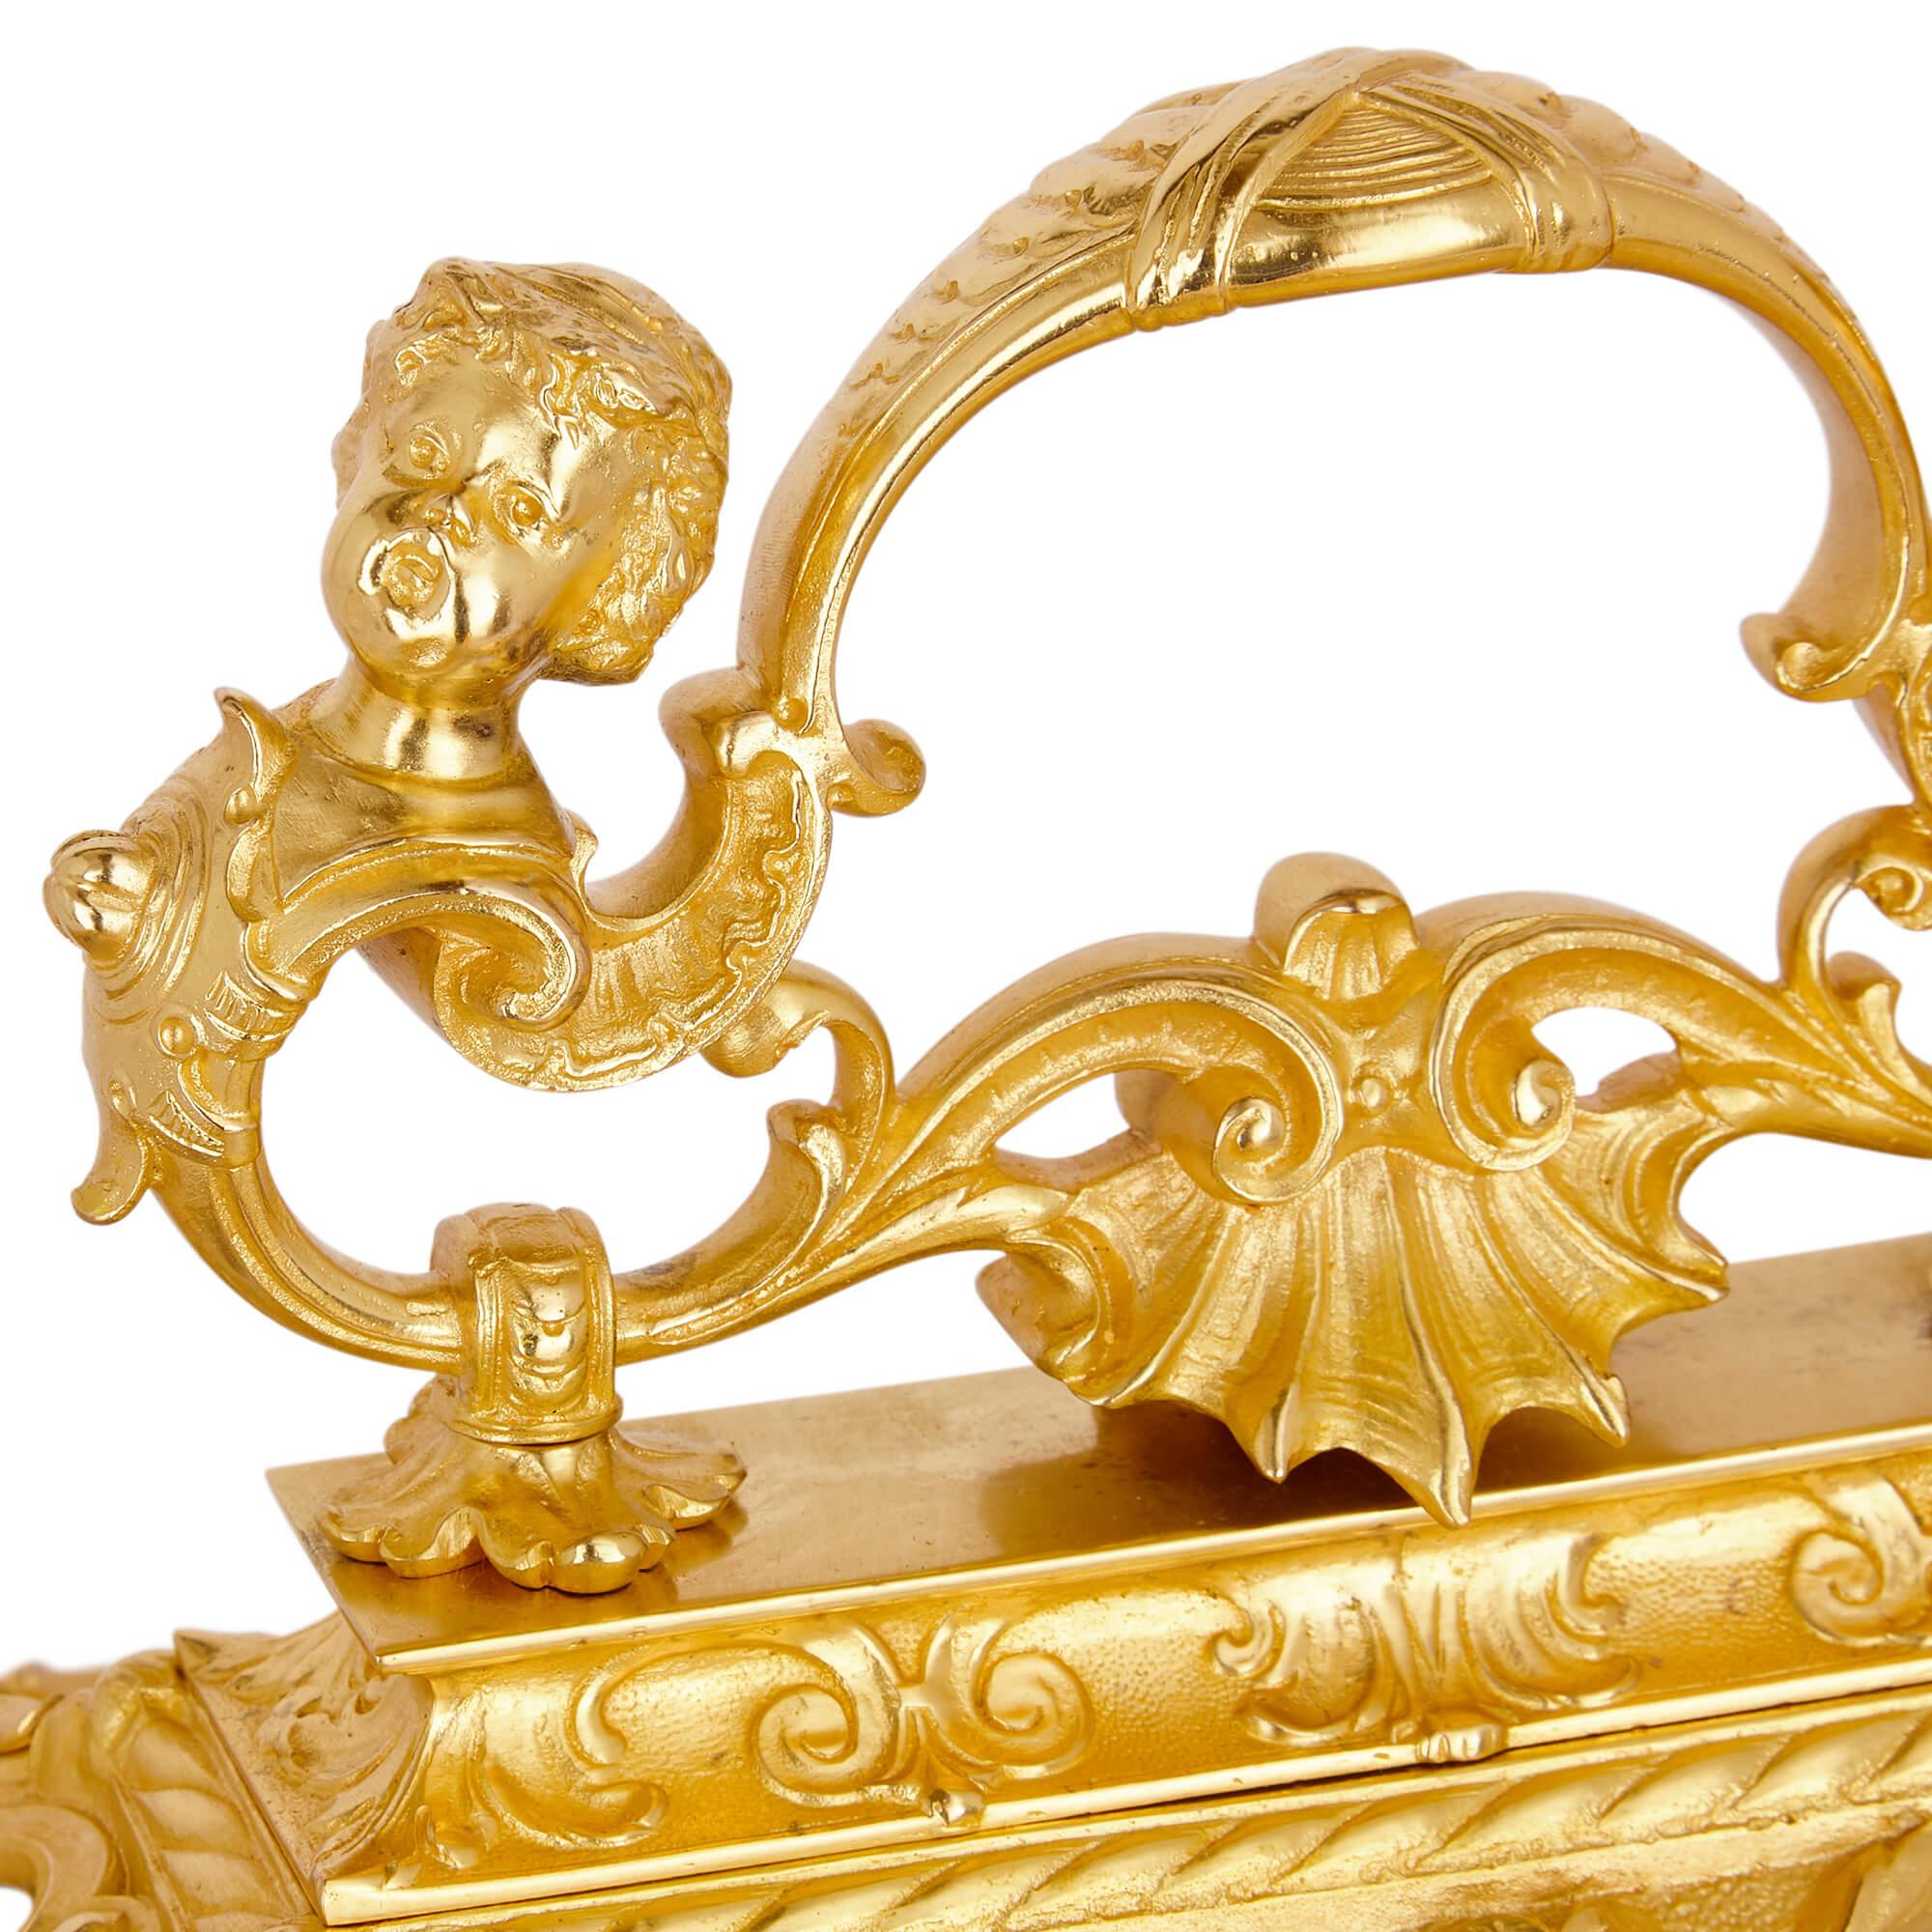 Large Rococo Style Gilt Bronze and KPM Porcelain Decorative Casket In Excellent Condition For Sale In London, GB